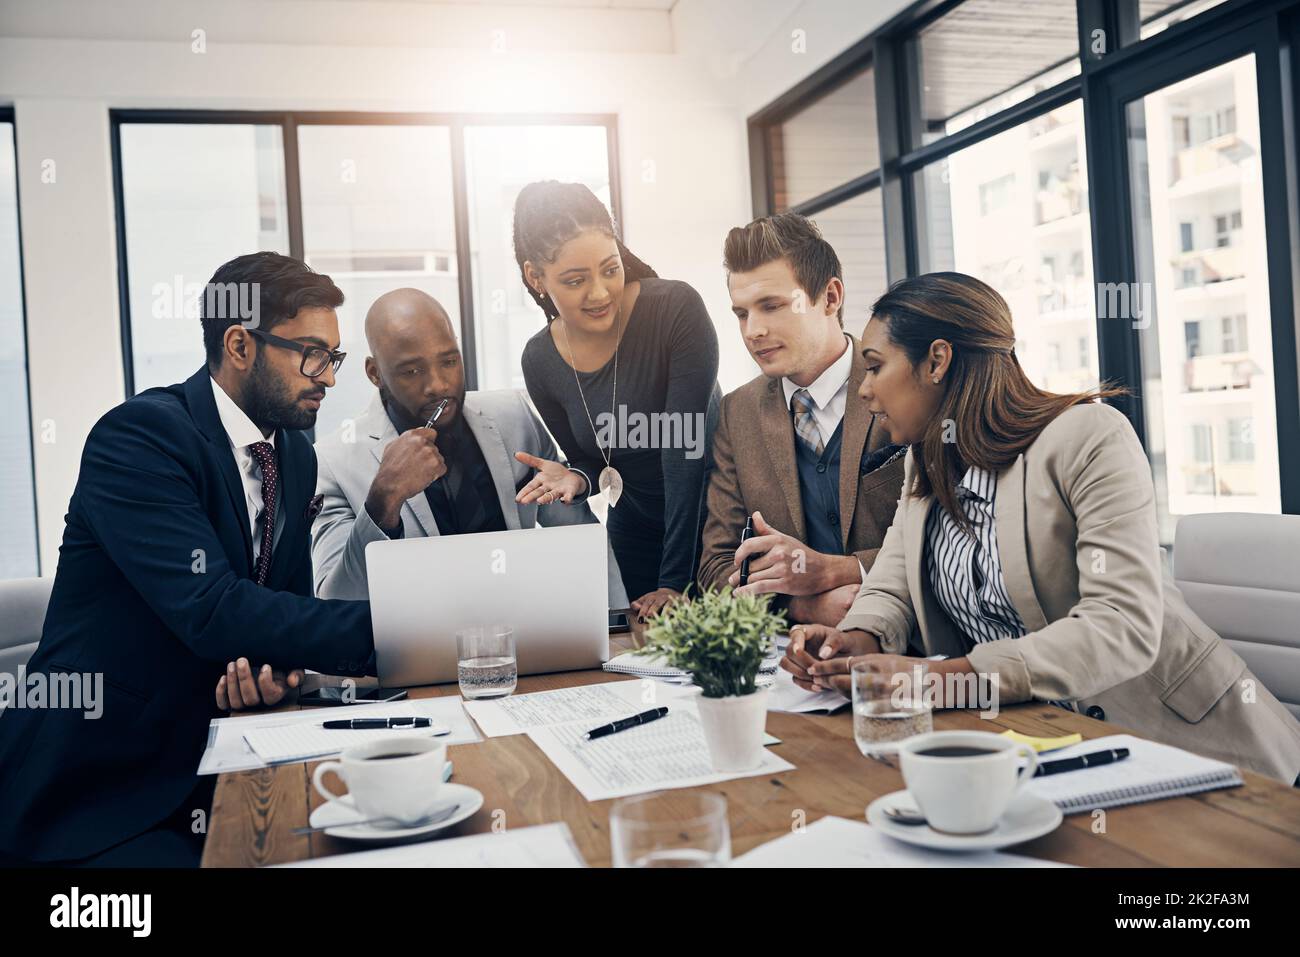 Business collaborations are what theyre best at. Shot of a group of young businesspeople using a laptop together during a meeting in a modern office. Stock Photo